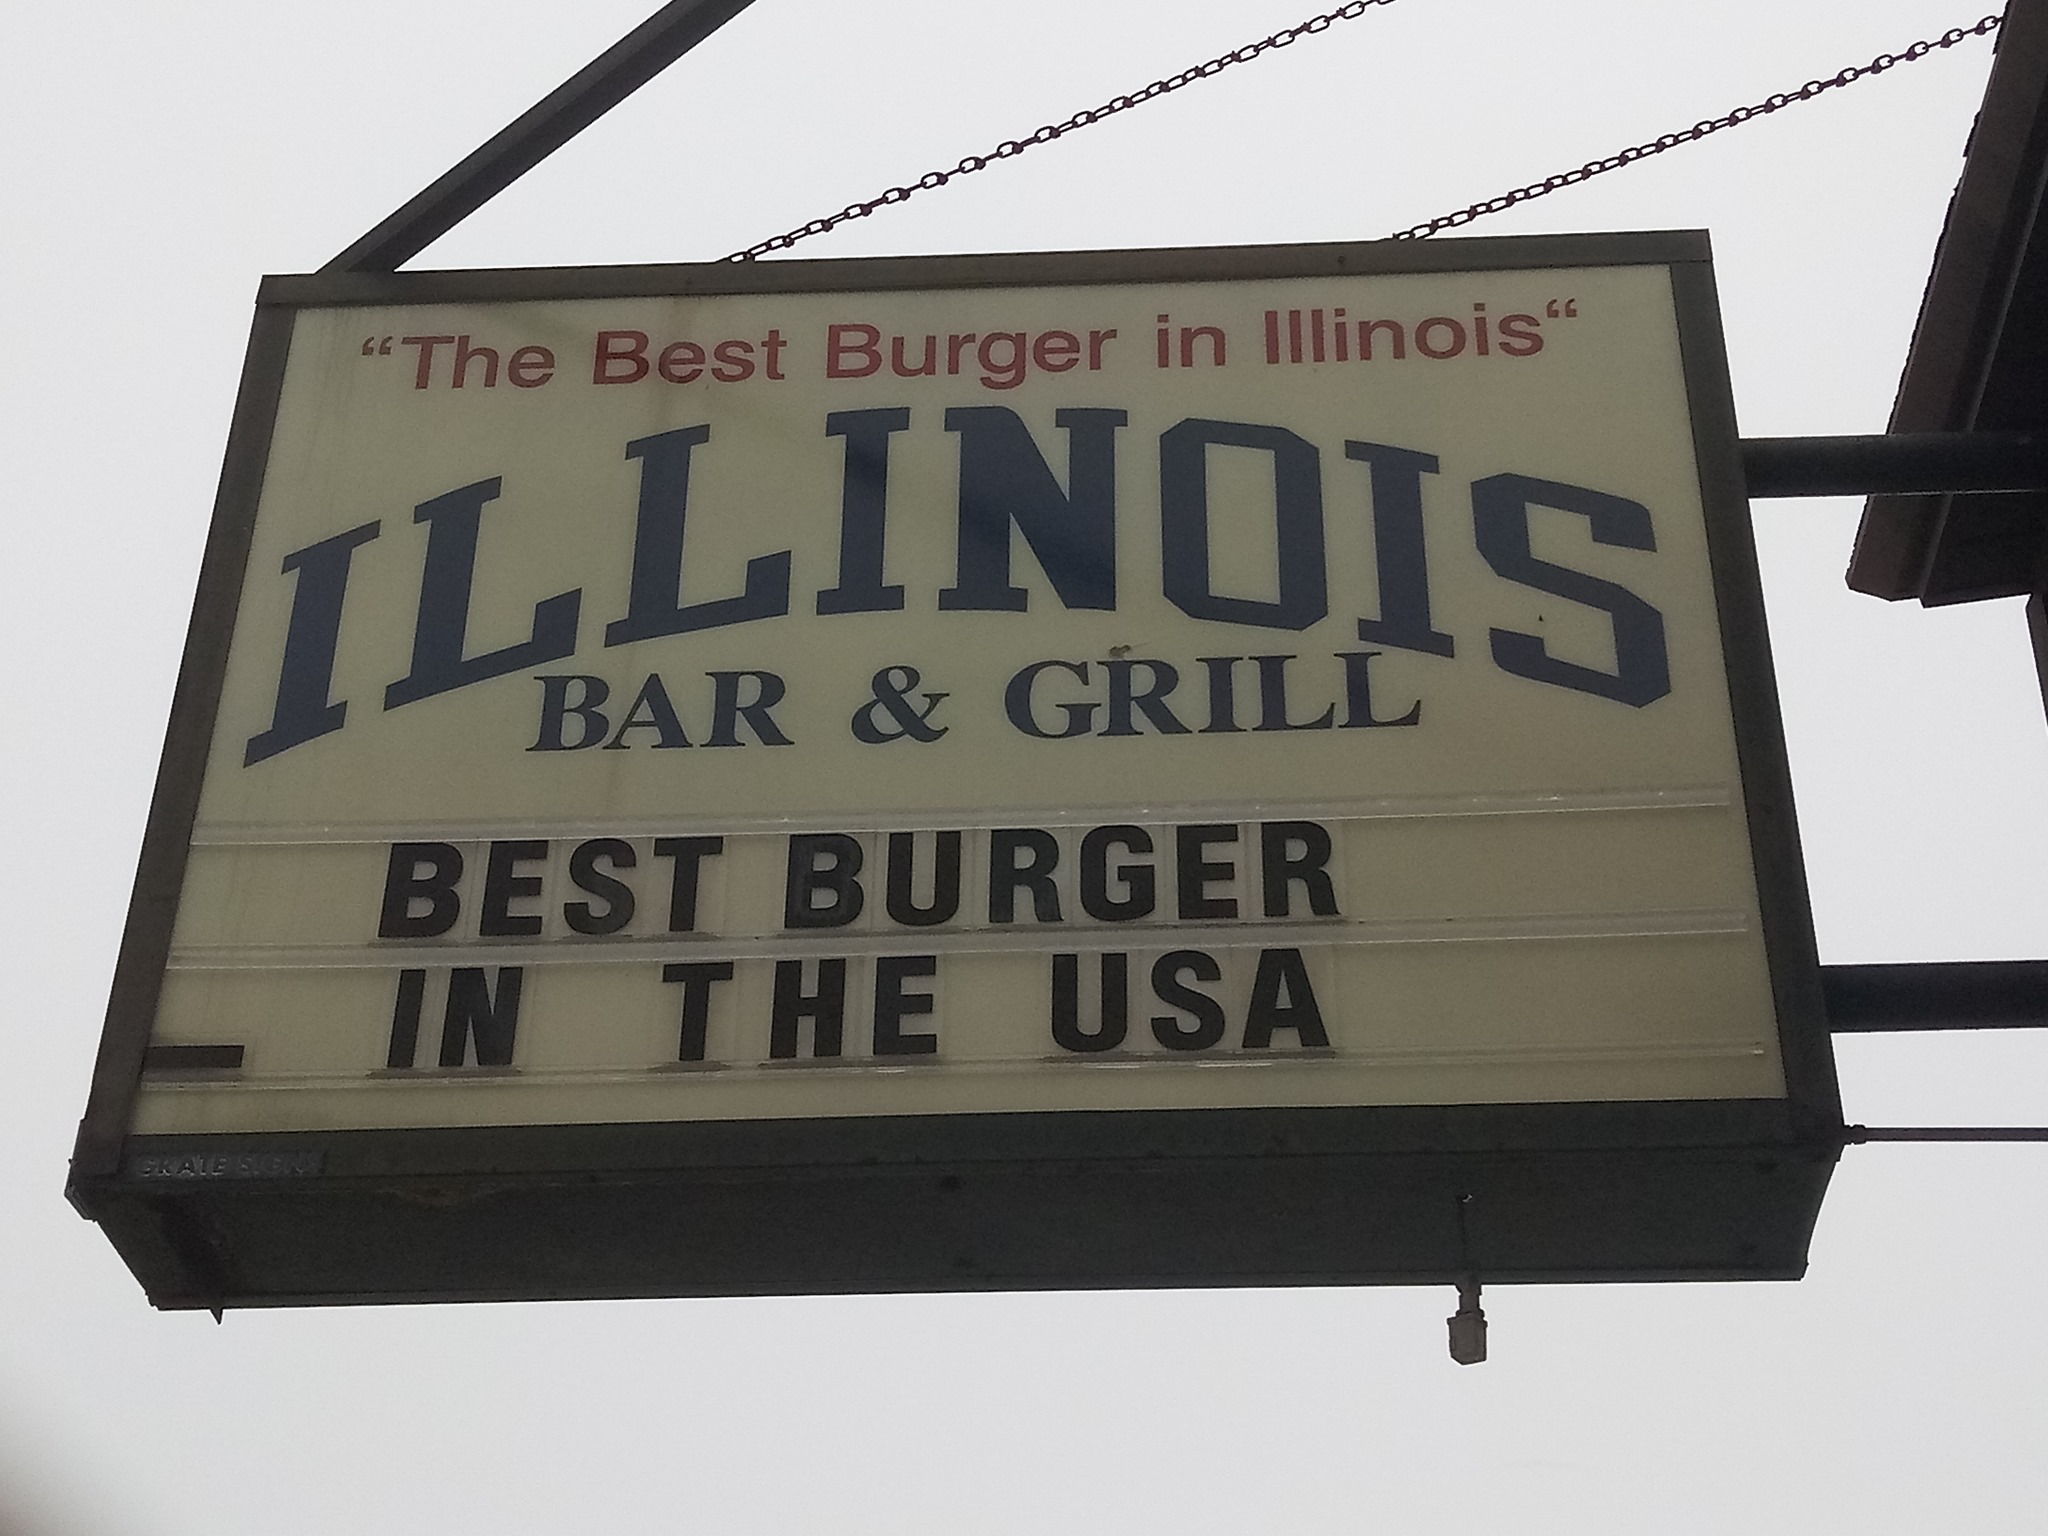 Illinois Bar and Grill on 47th